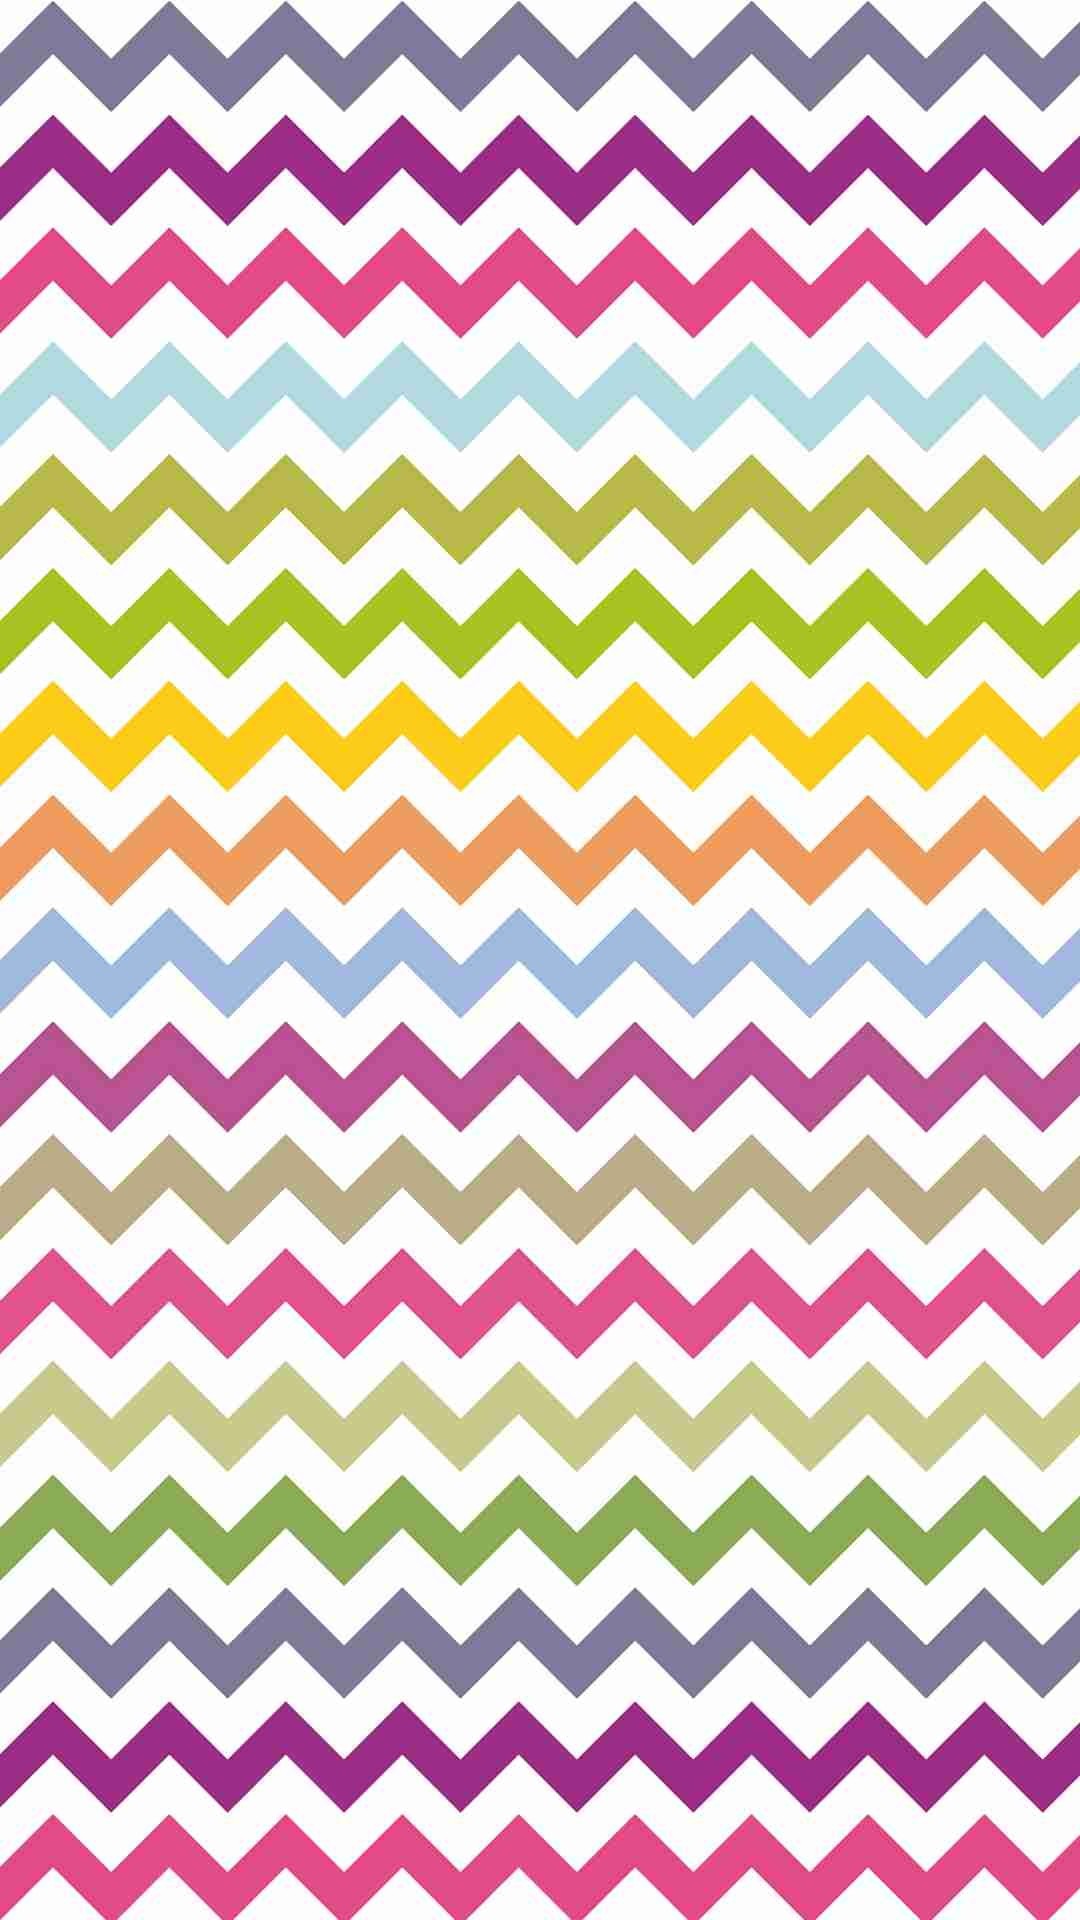 1080x1920 Bright Colors Zigzag and Chevron iPhone 6 Plus Wallpaper - Tribal Print  Pattern #iPhone #